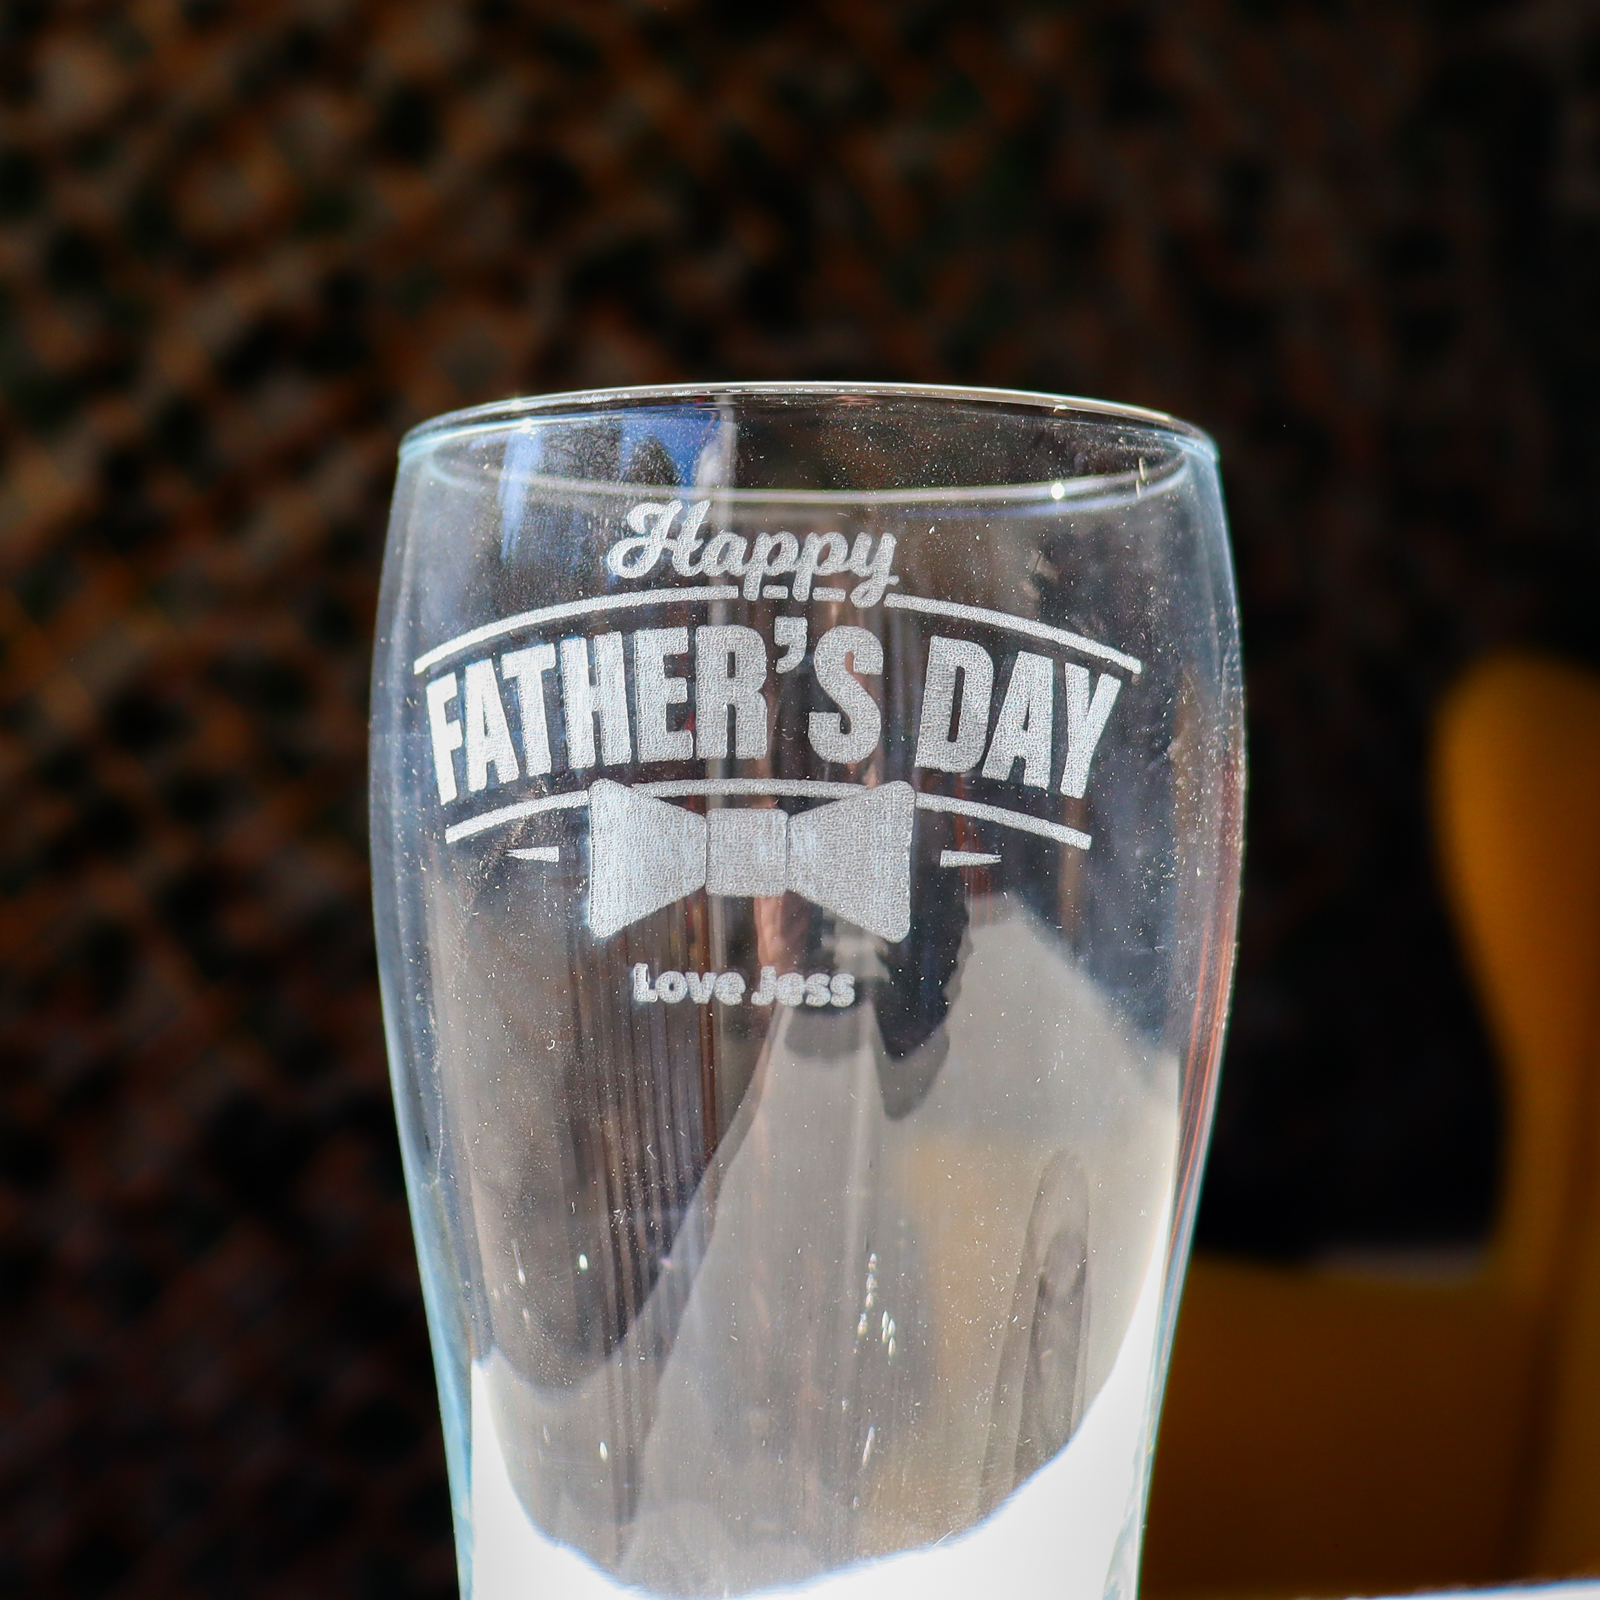 Father’s day schooner glass